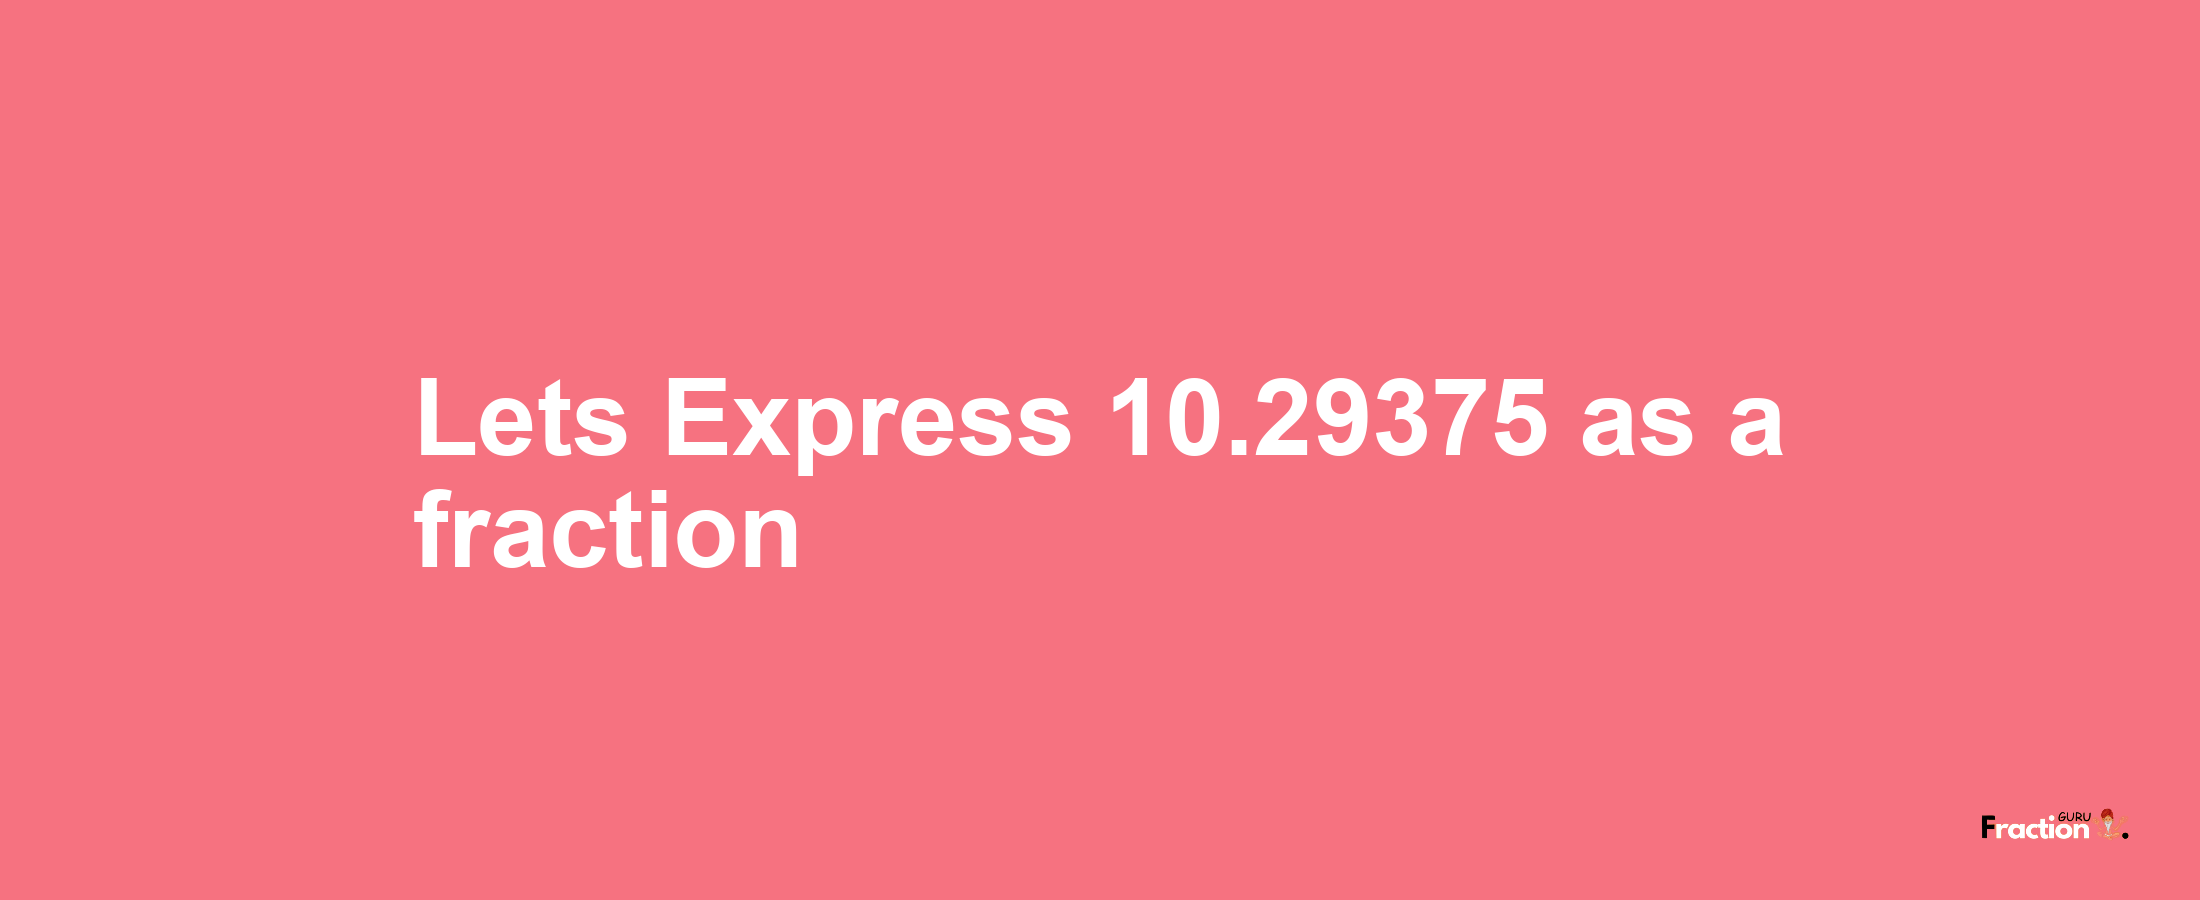 Lets Express 10.29375 as afraction